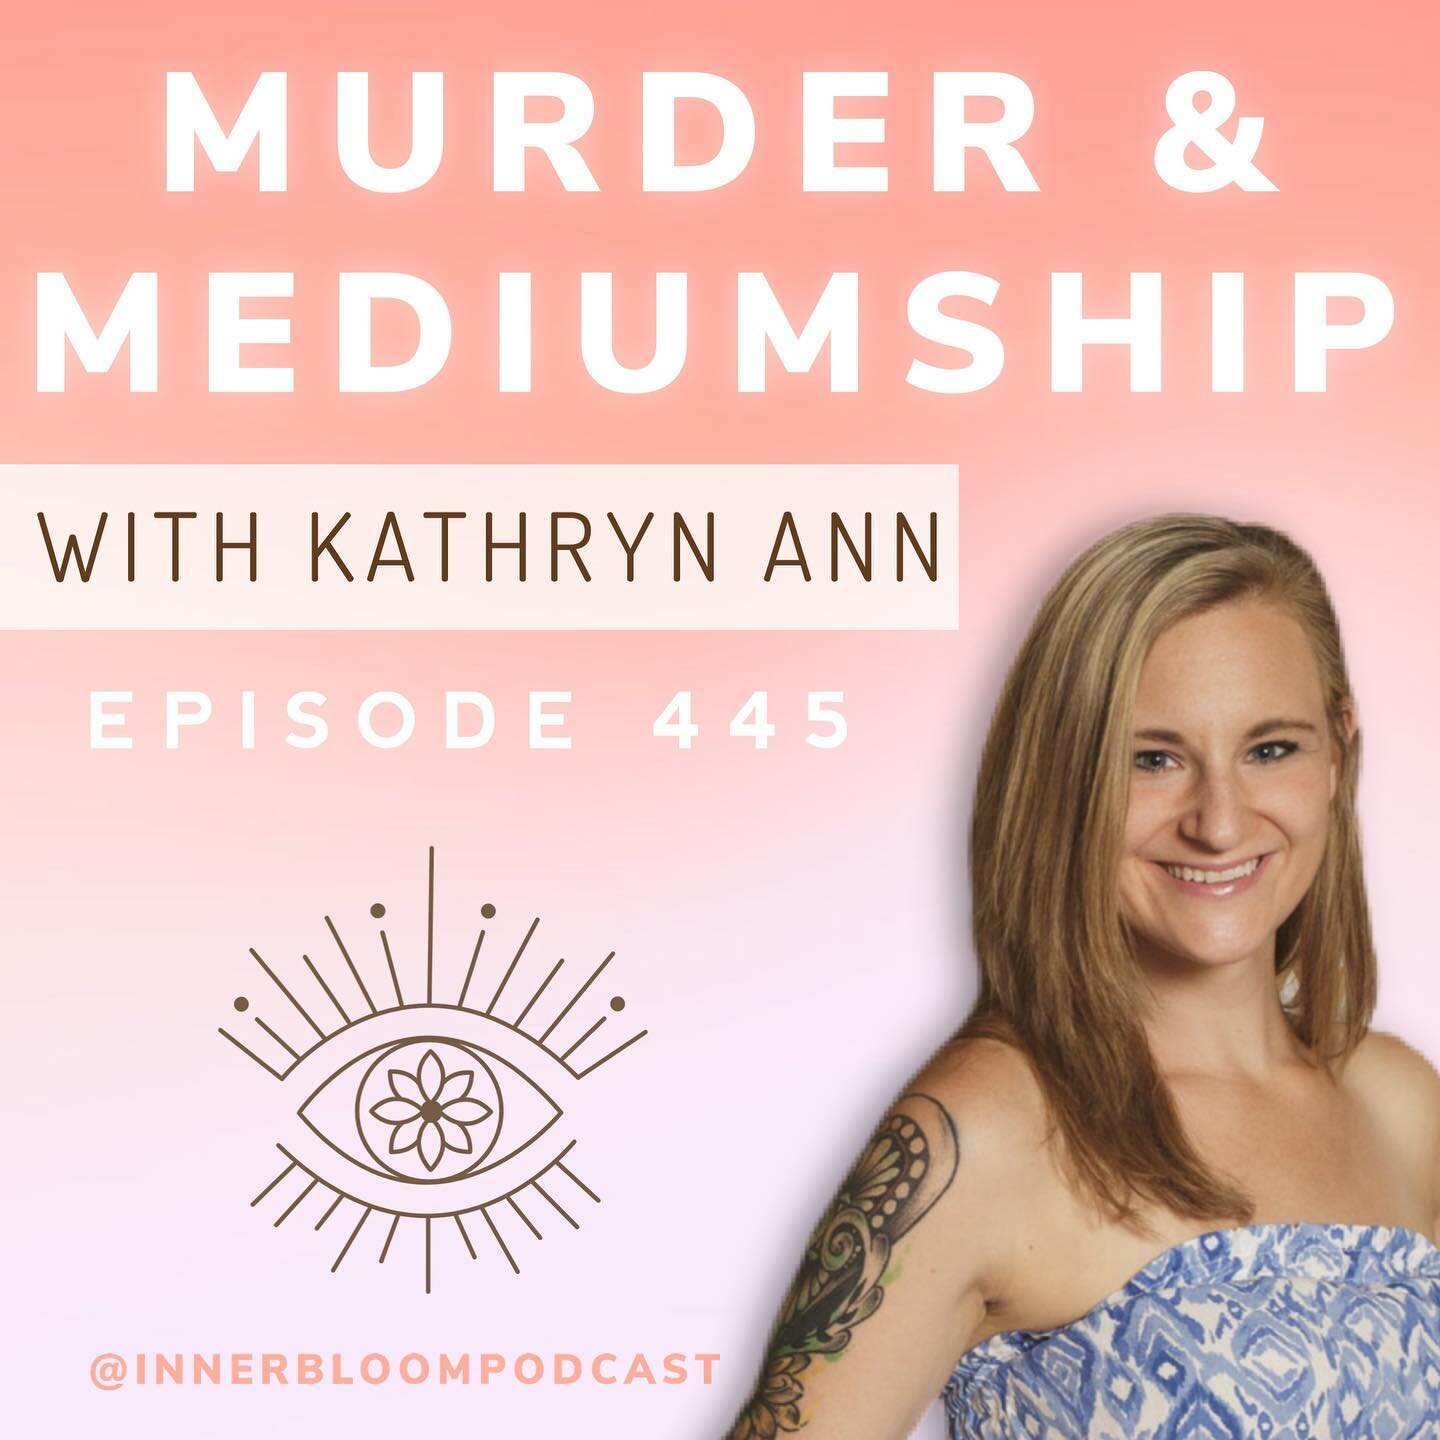 @kathryn.ann.intuitive is a psychic medium and true crime-obsessed host of the podcast Murder and Mediumship @murderandmediumship 

In this episode (445) Kathryn talks about how her pull to investigate murders and missing people led her to a discover